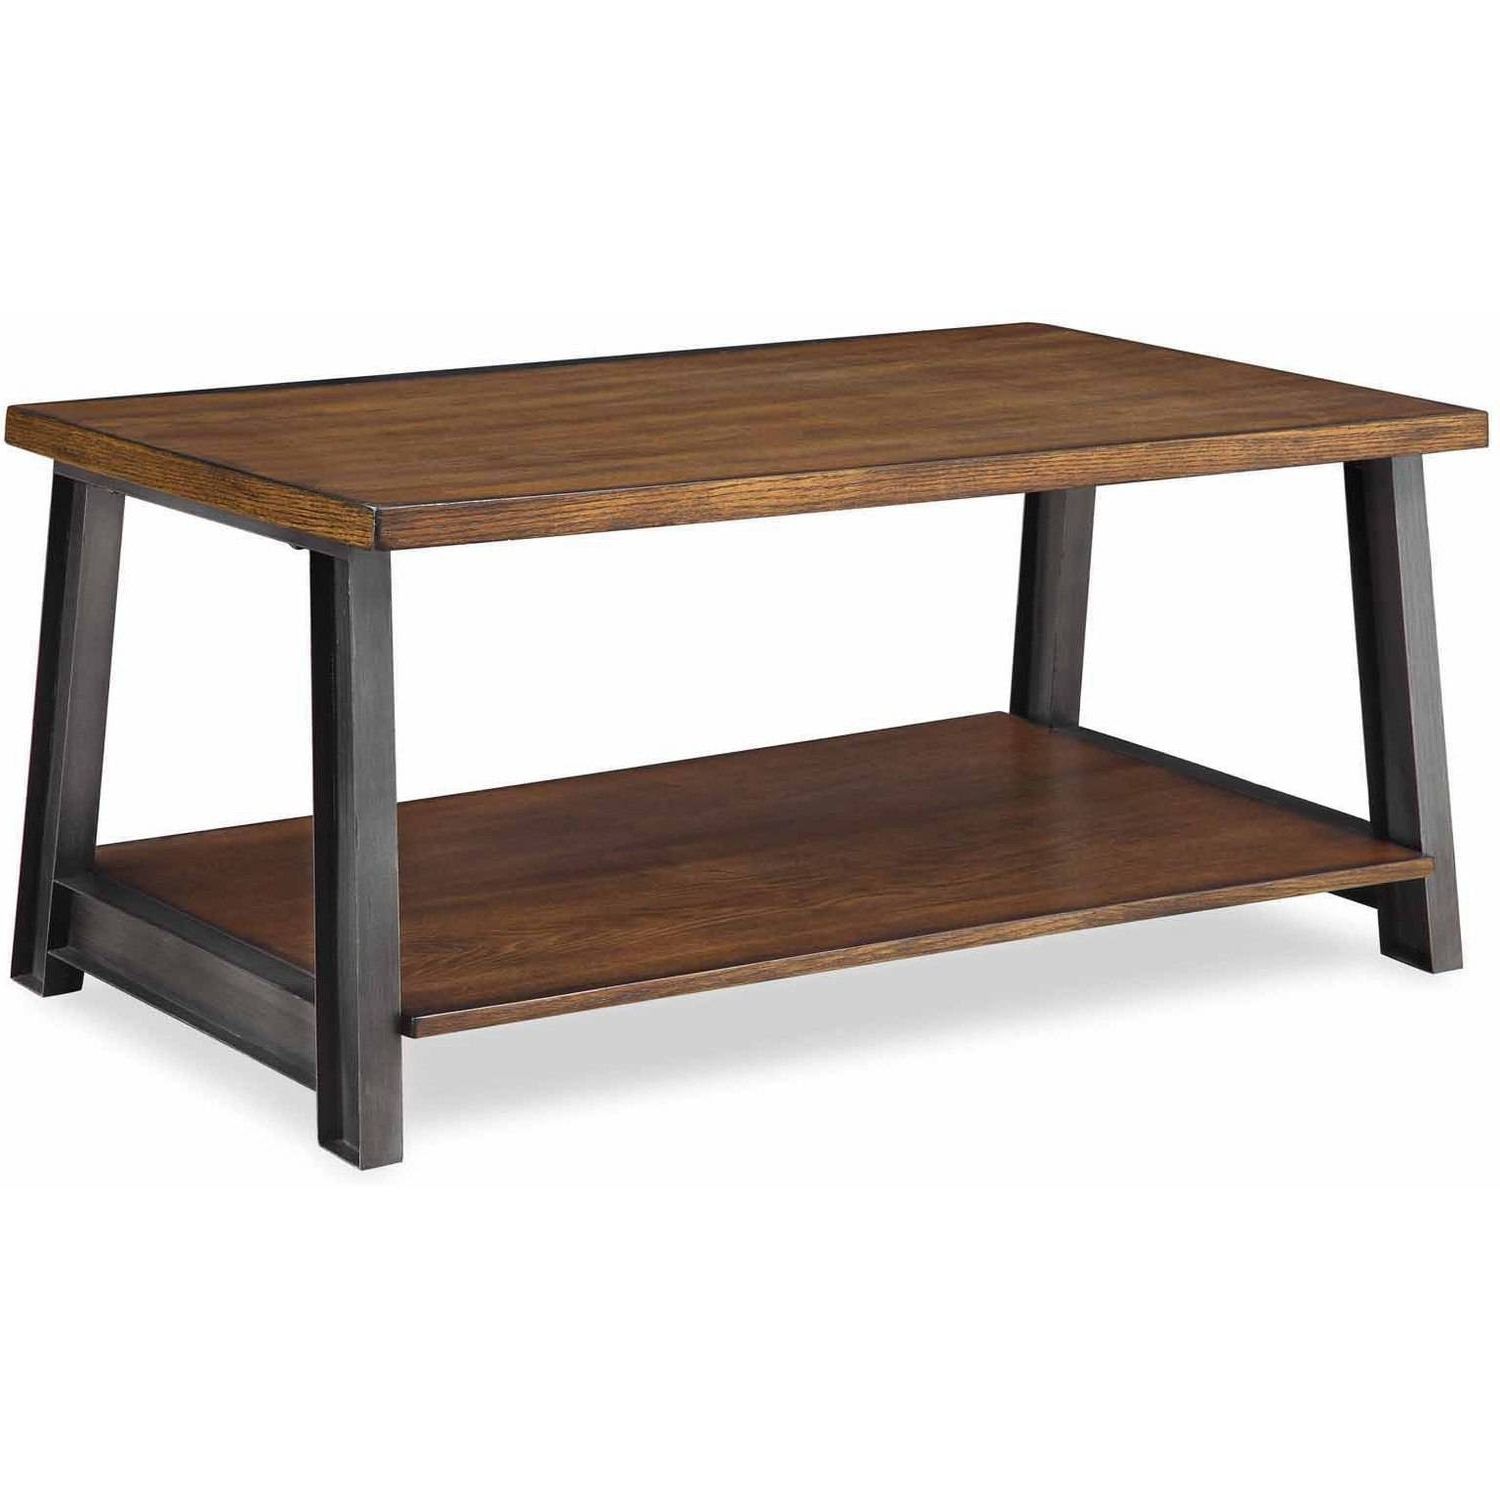 Current Shelter Cocktail Tables With Regard To Better Homes And Gardens Mercer Coffee Table, Vintage Oak – Walmart (View 9 of 20)